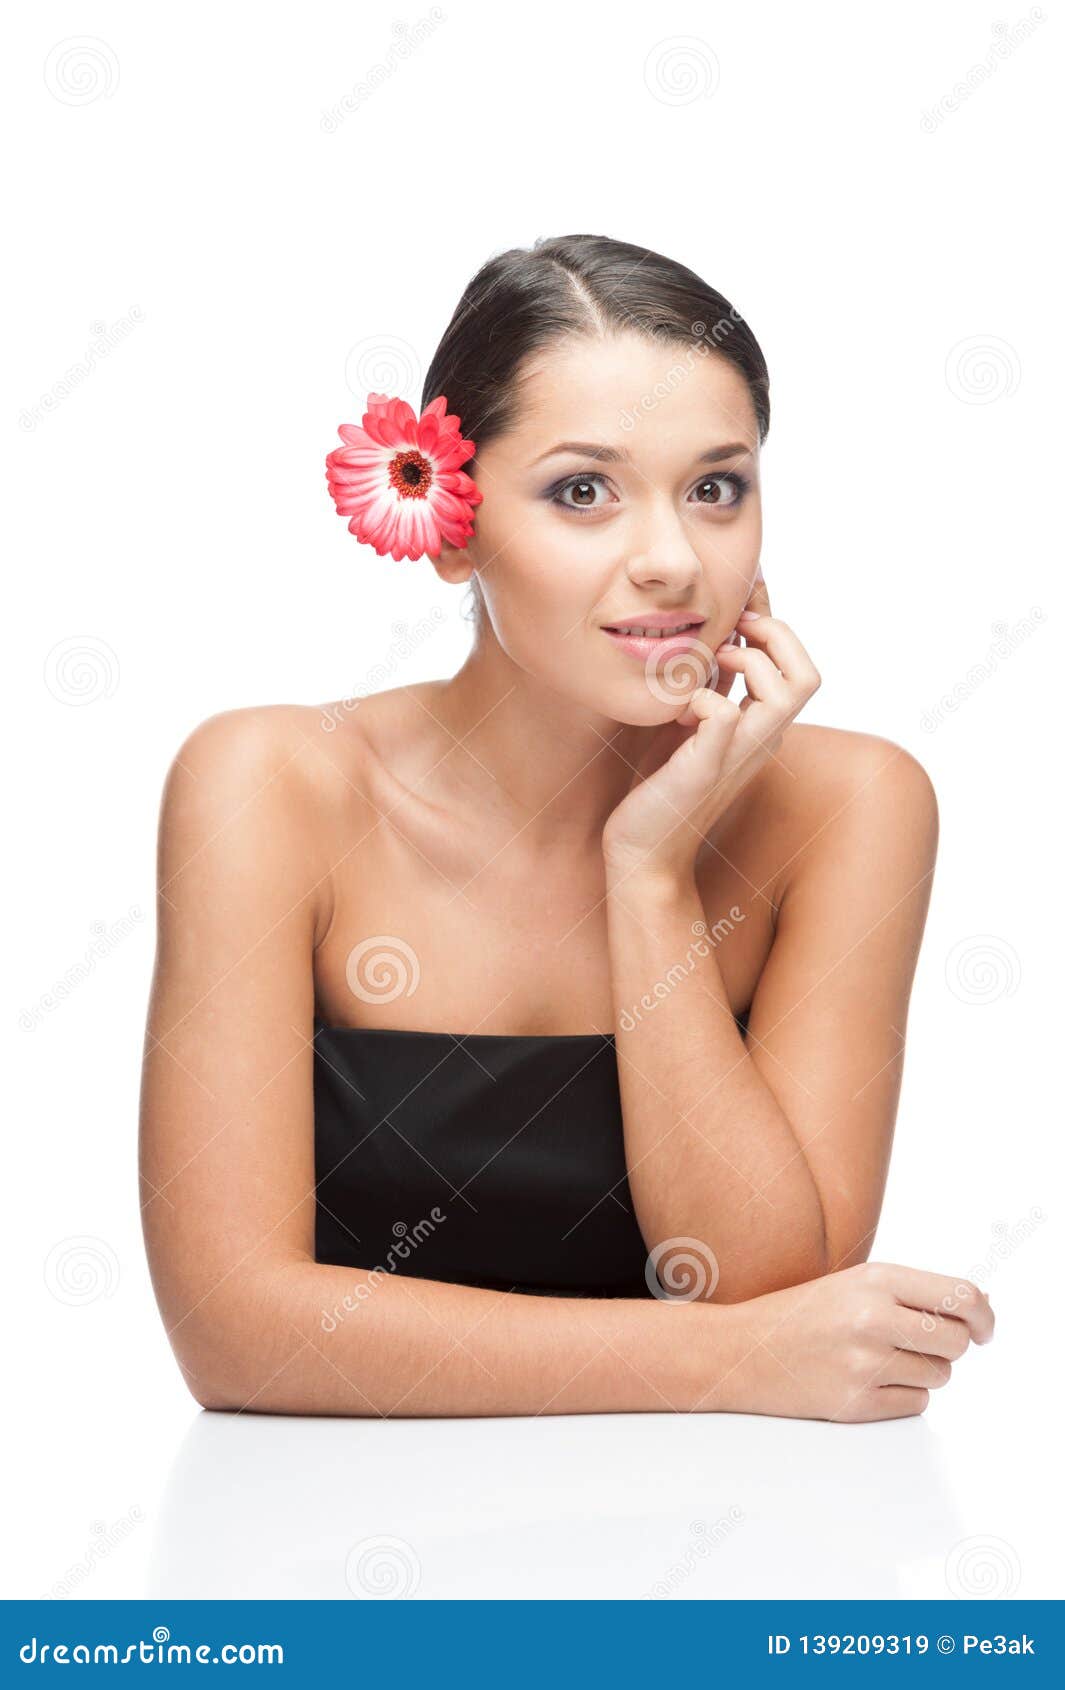 Young Beautiful Woman Relaxing With Gerbera Flower At Spa Isolated